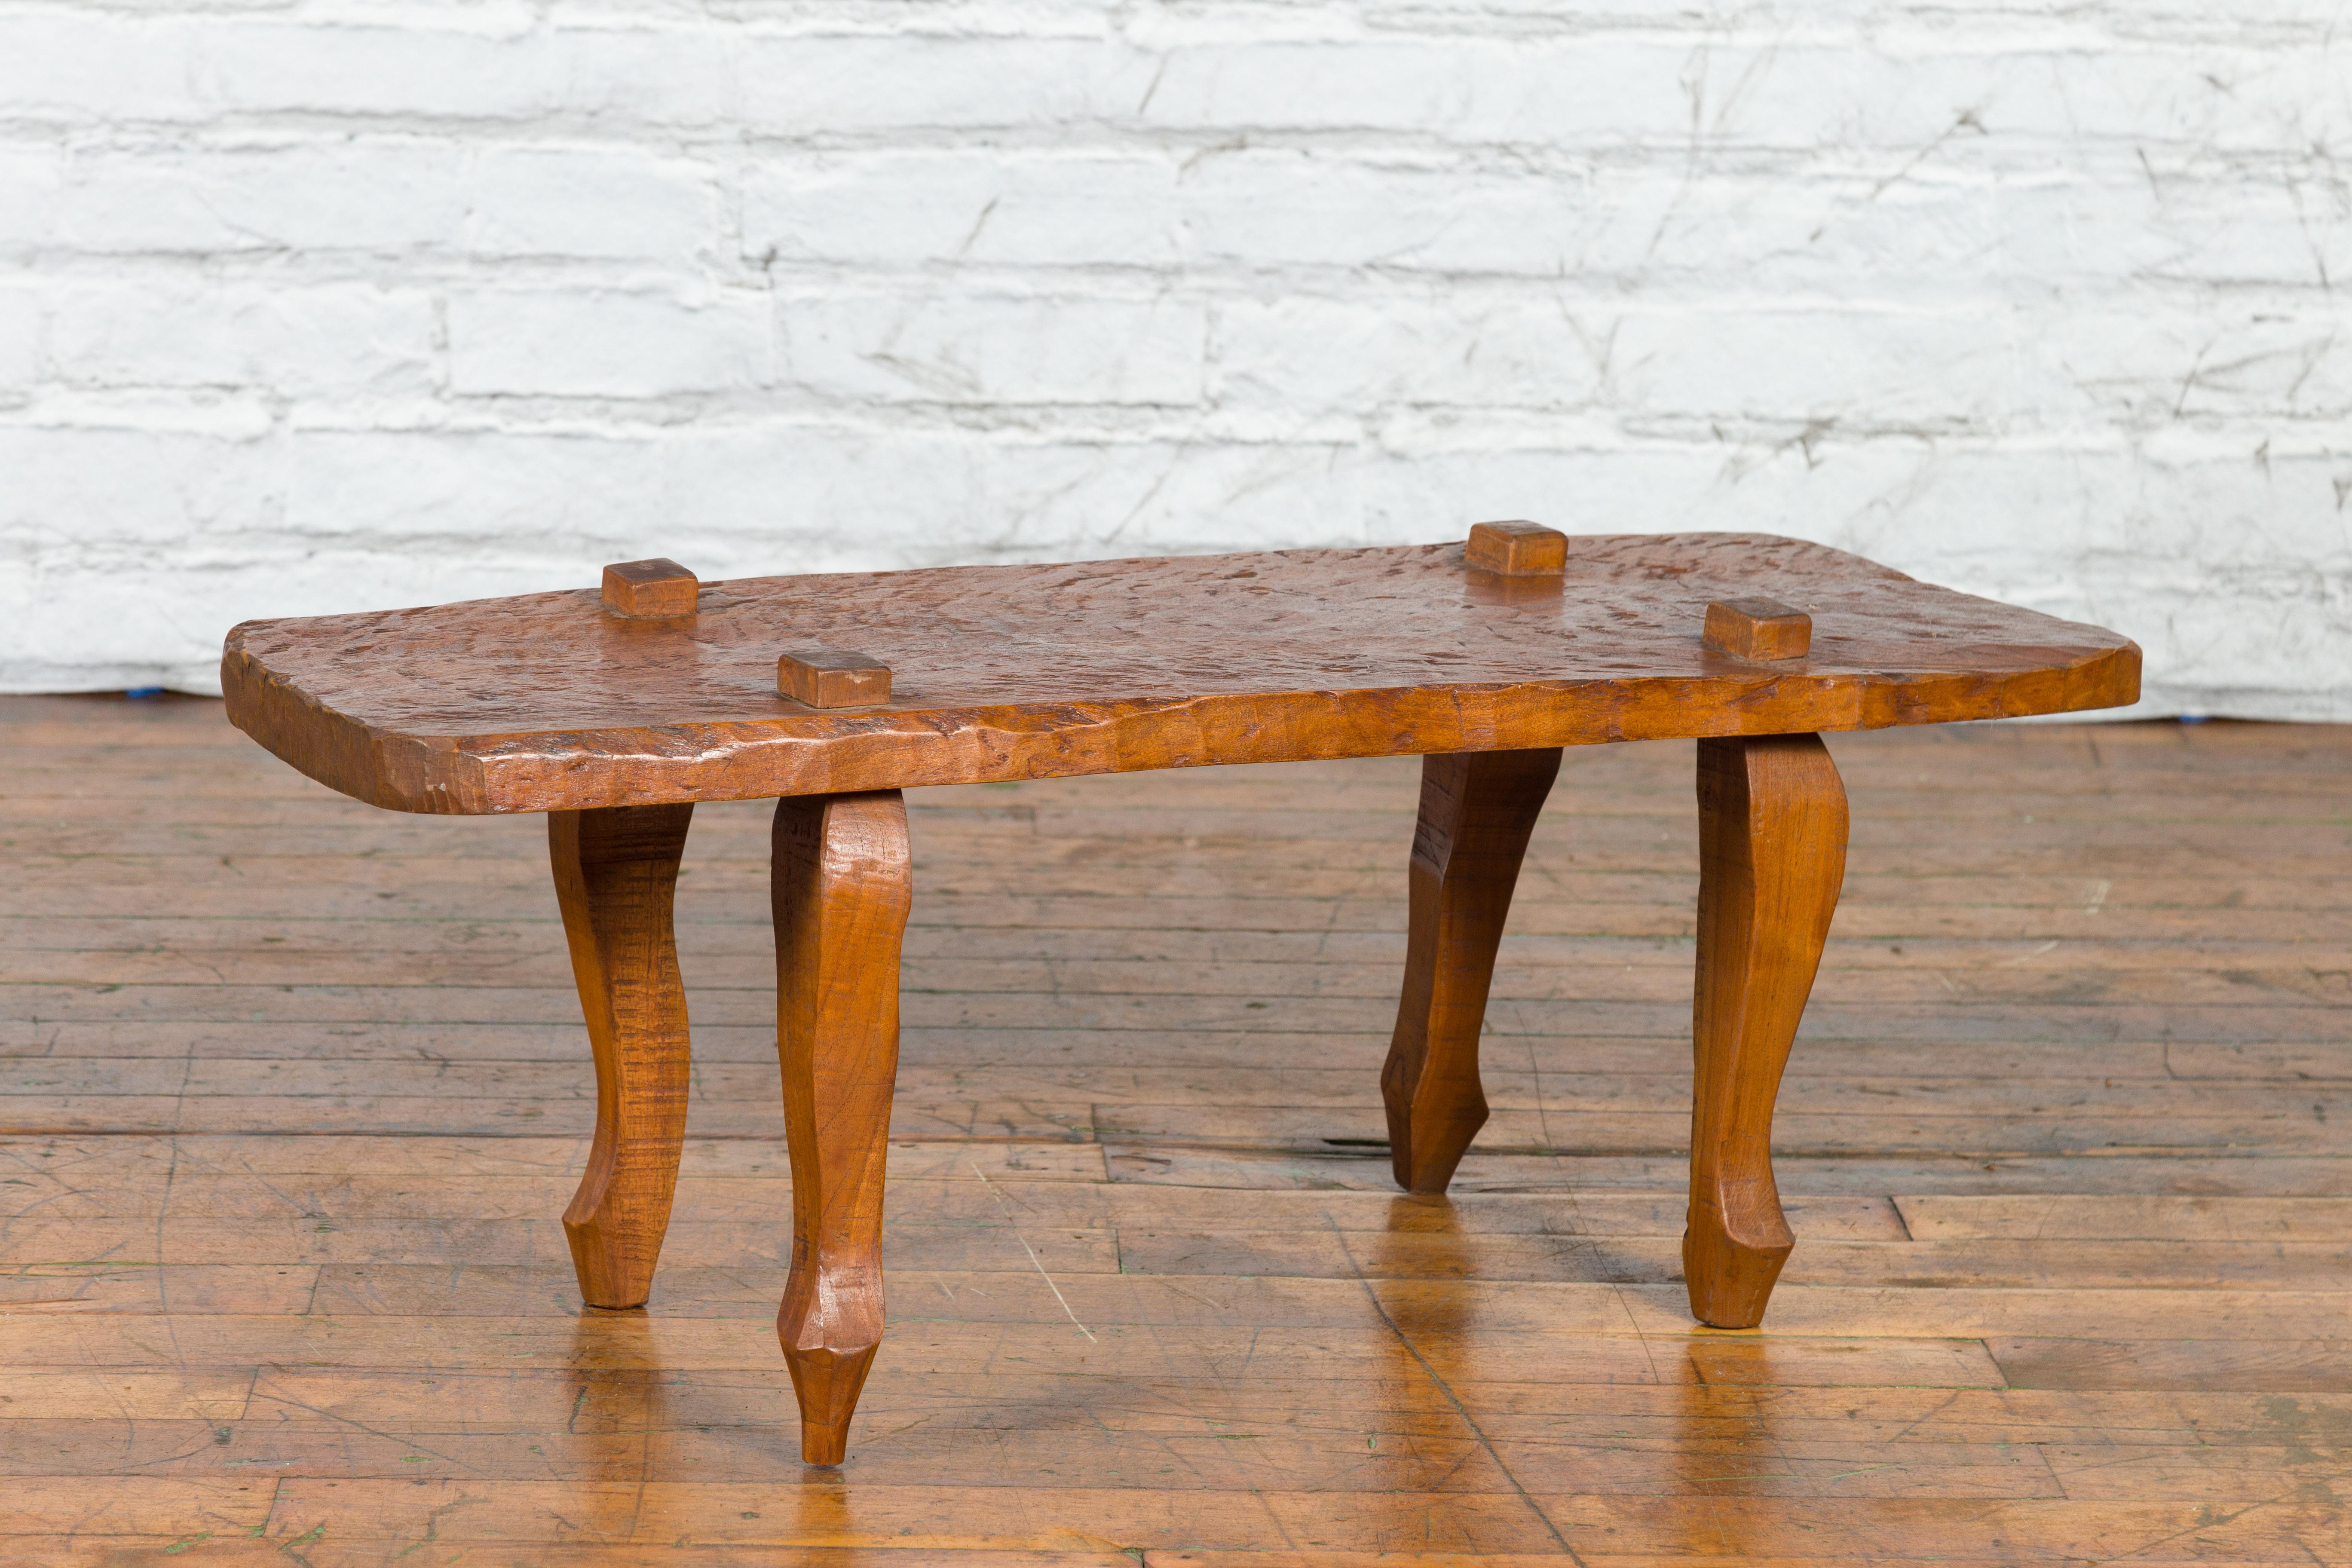 A Javanese Arts & Crafts teak low table / bench from the early 20th century, with carved recessed legs. Created in Java during the early years of the 20th century, this Arts & Crafts teak table features an irregular rectangular top with raised